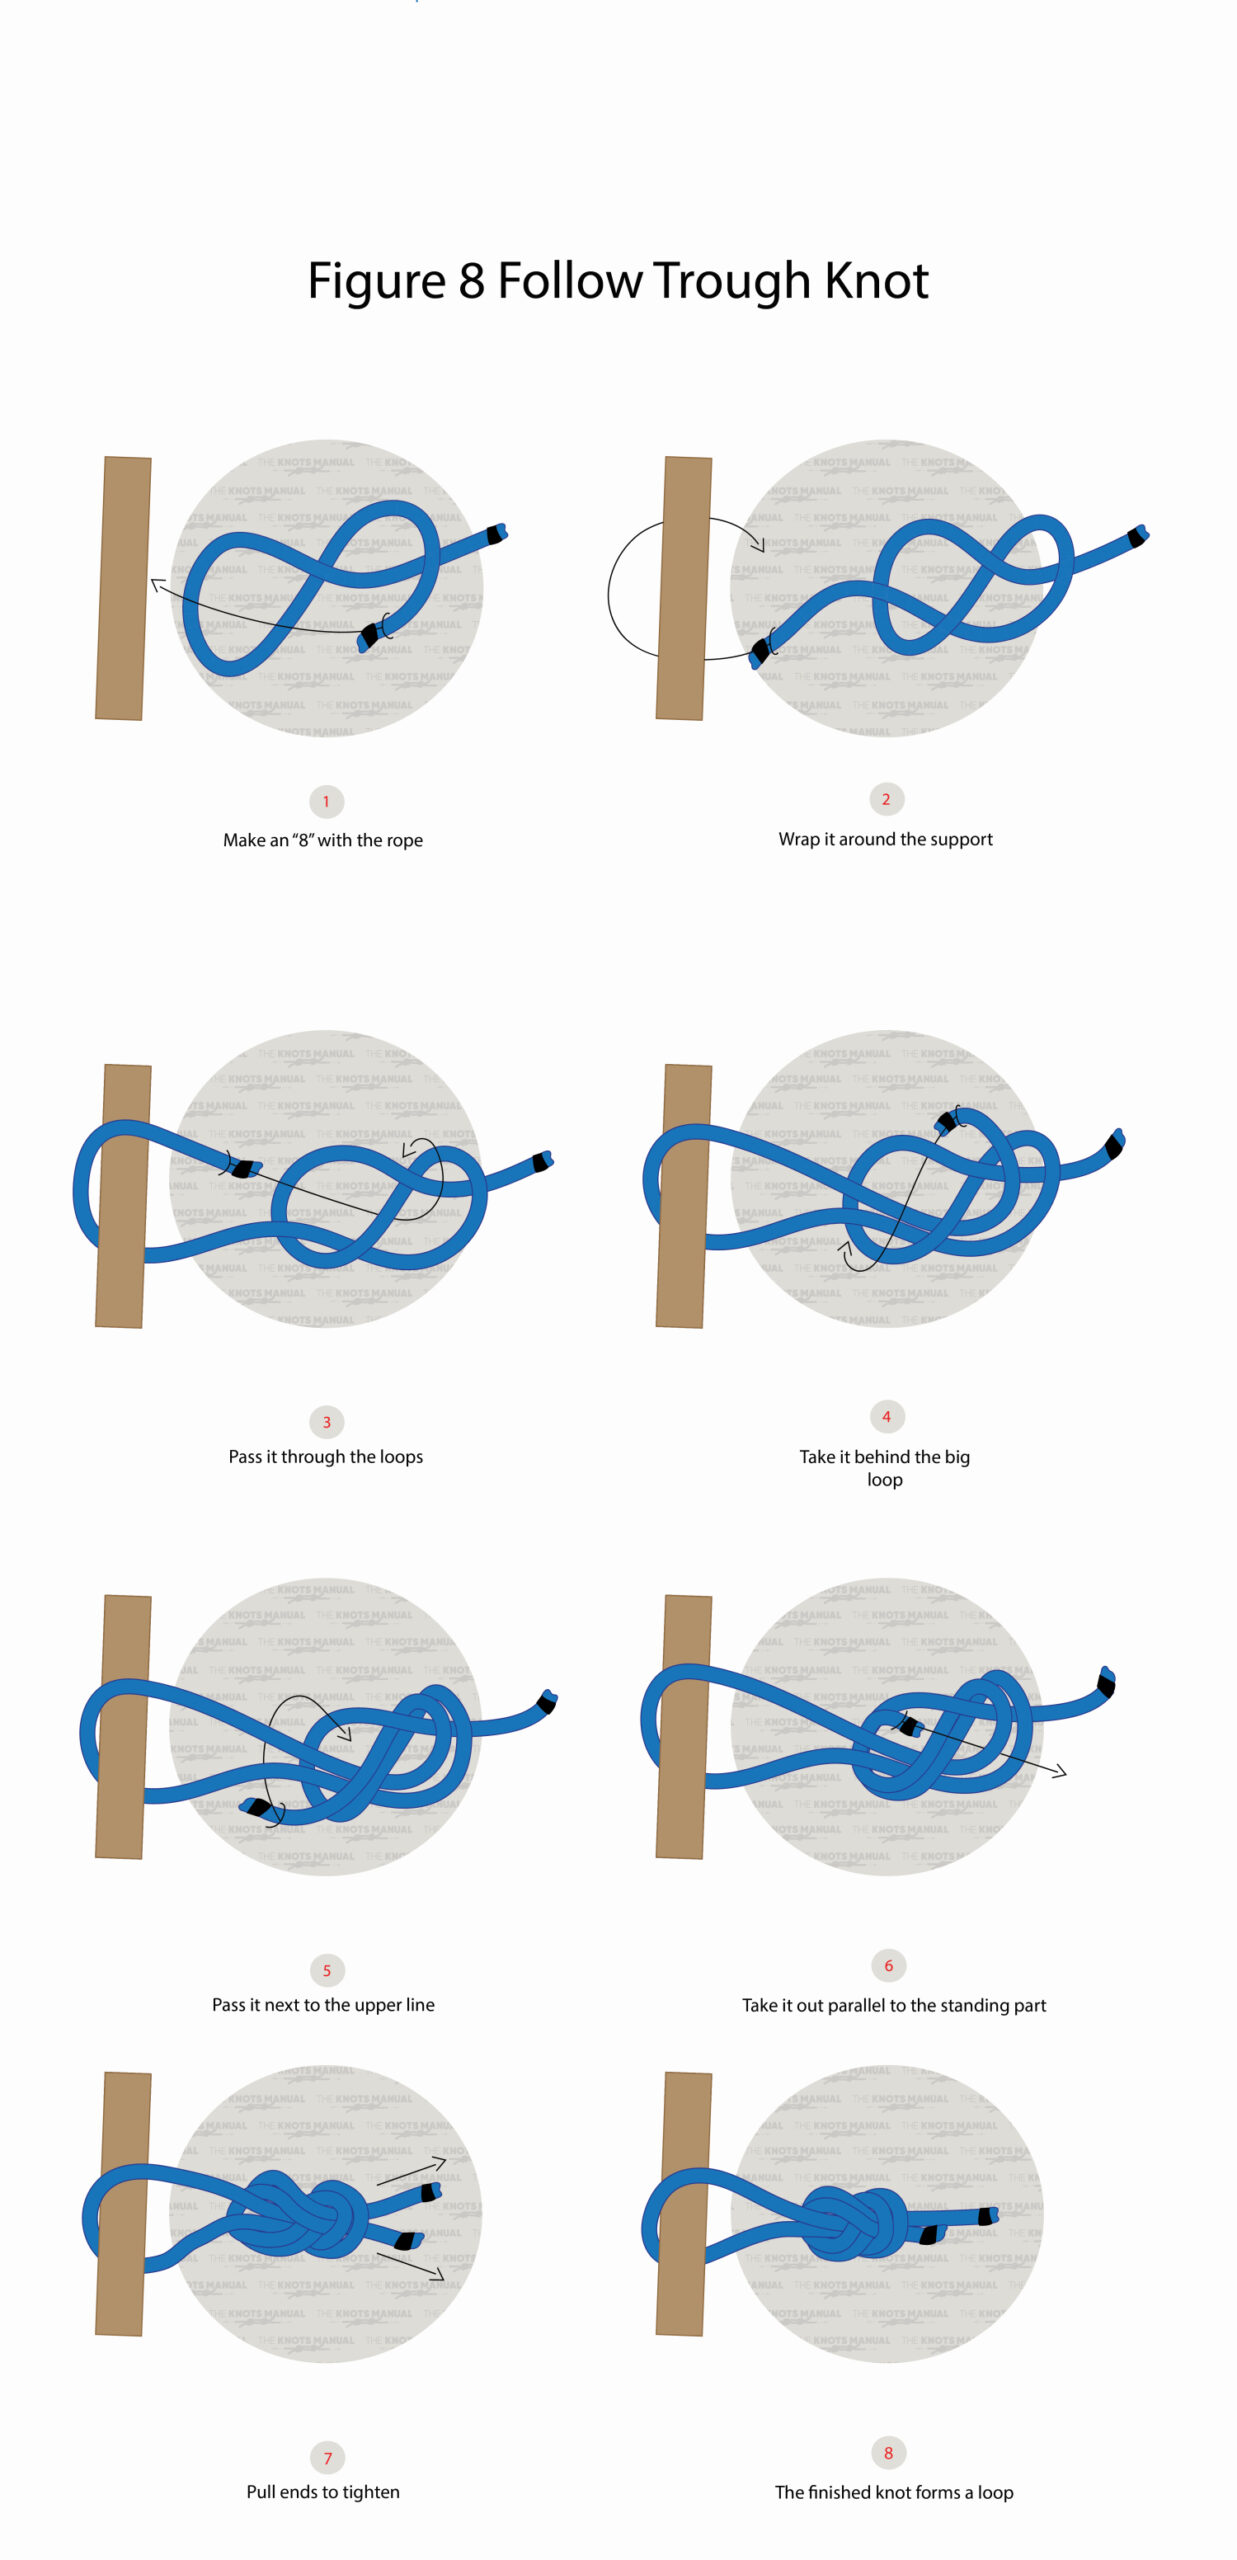 Figure 8 Follow Through Knot: Step-By-Step Guide